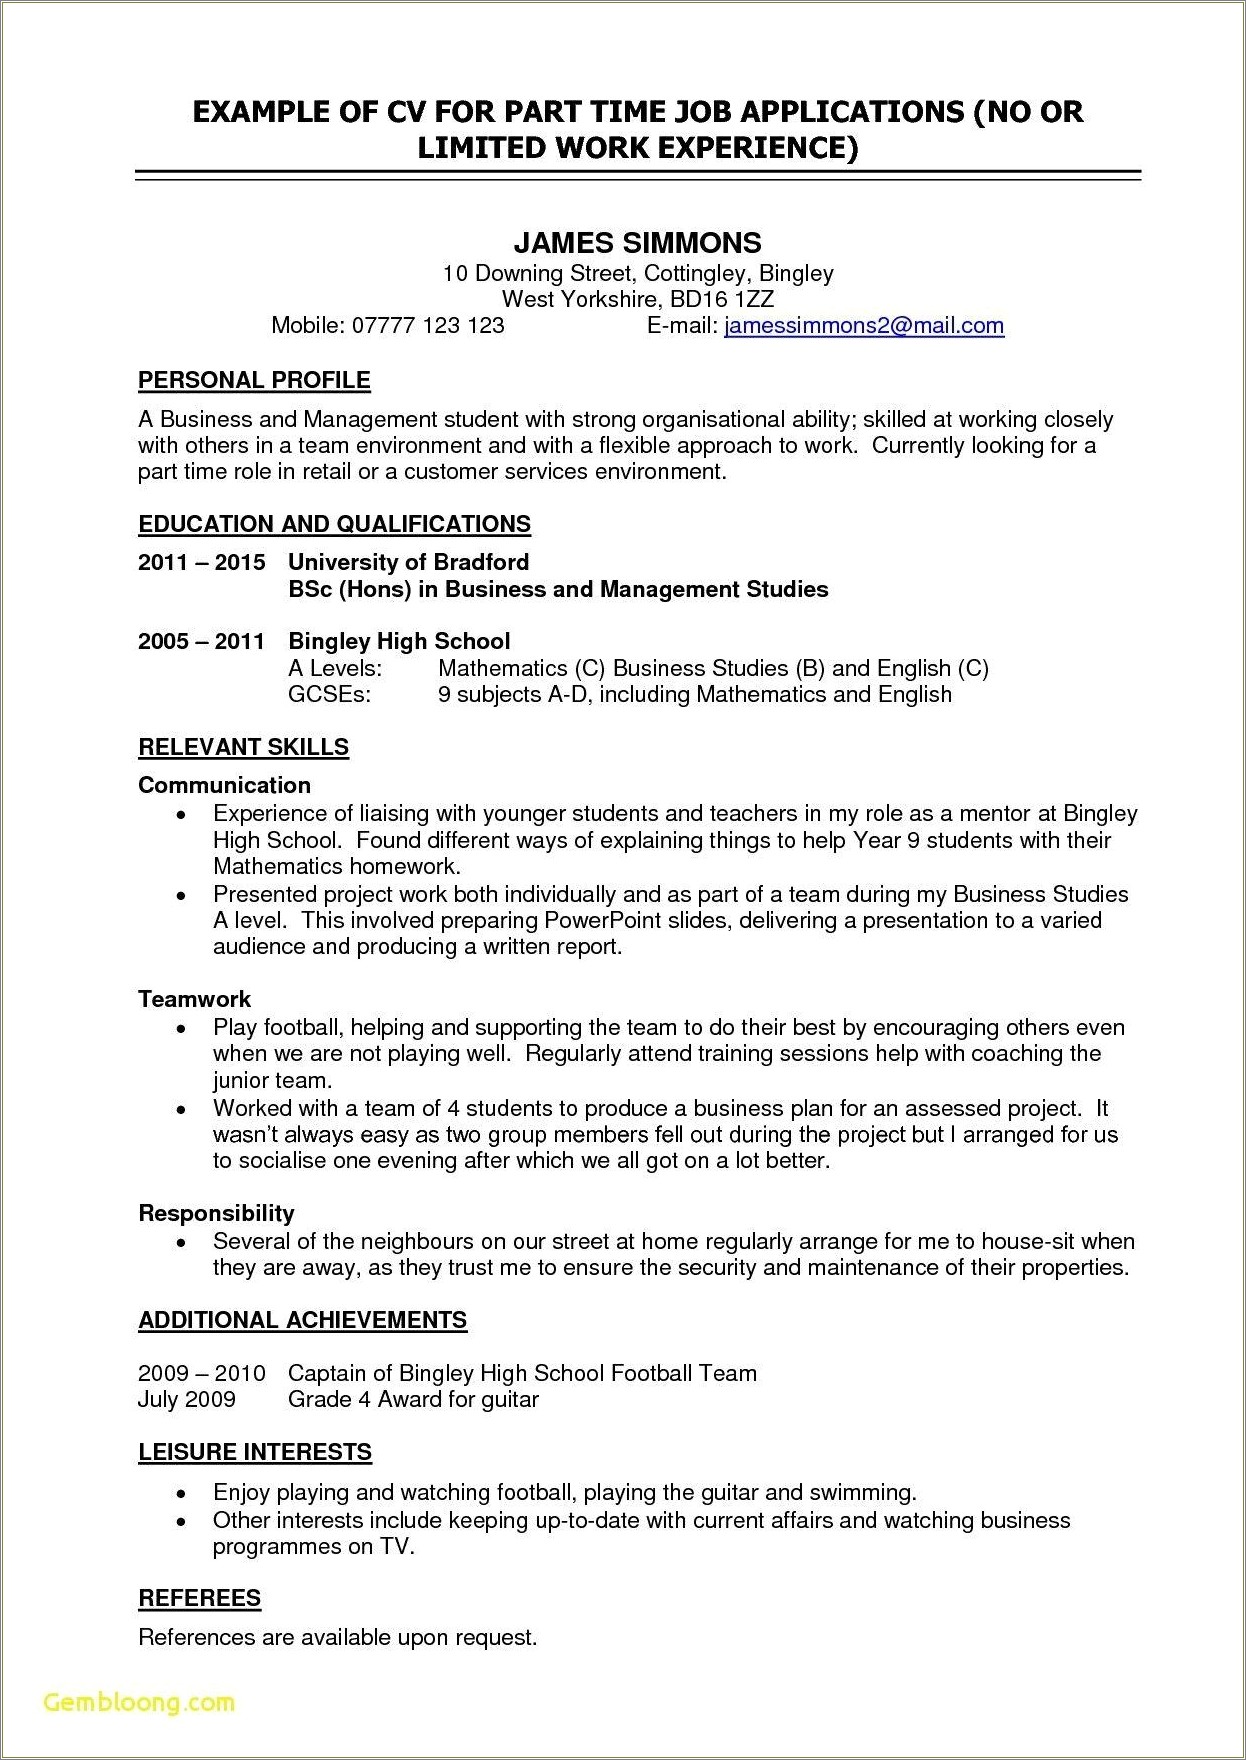 Add Approach To Work In Resume